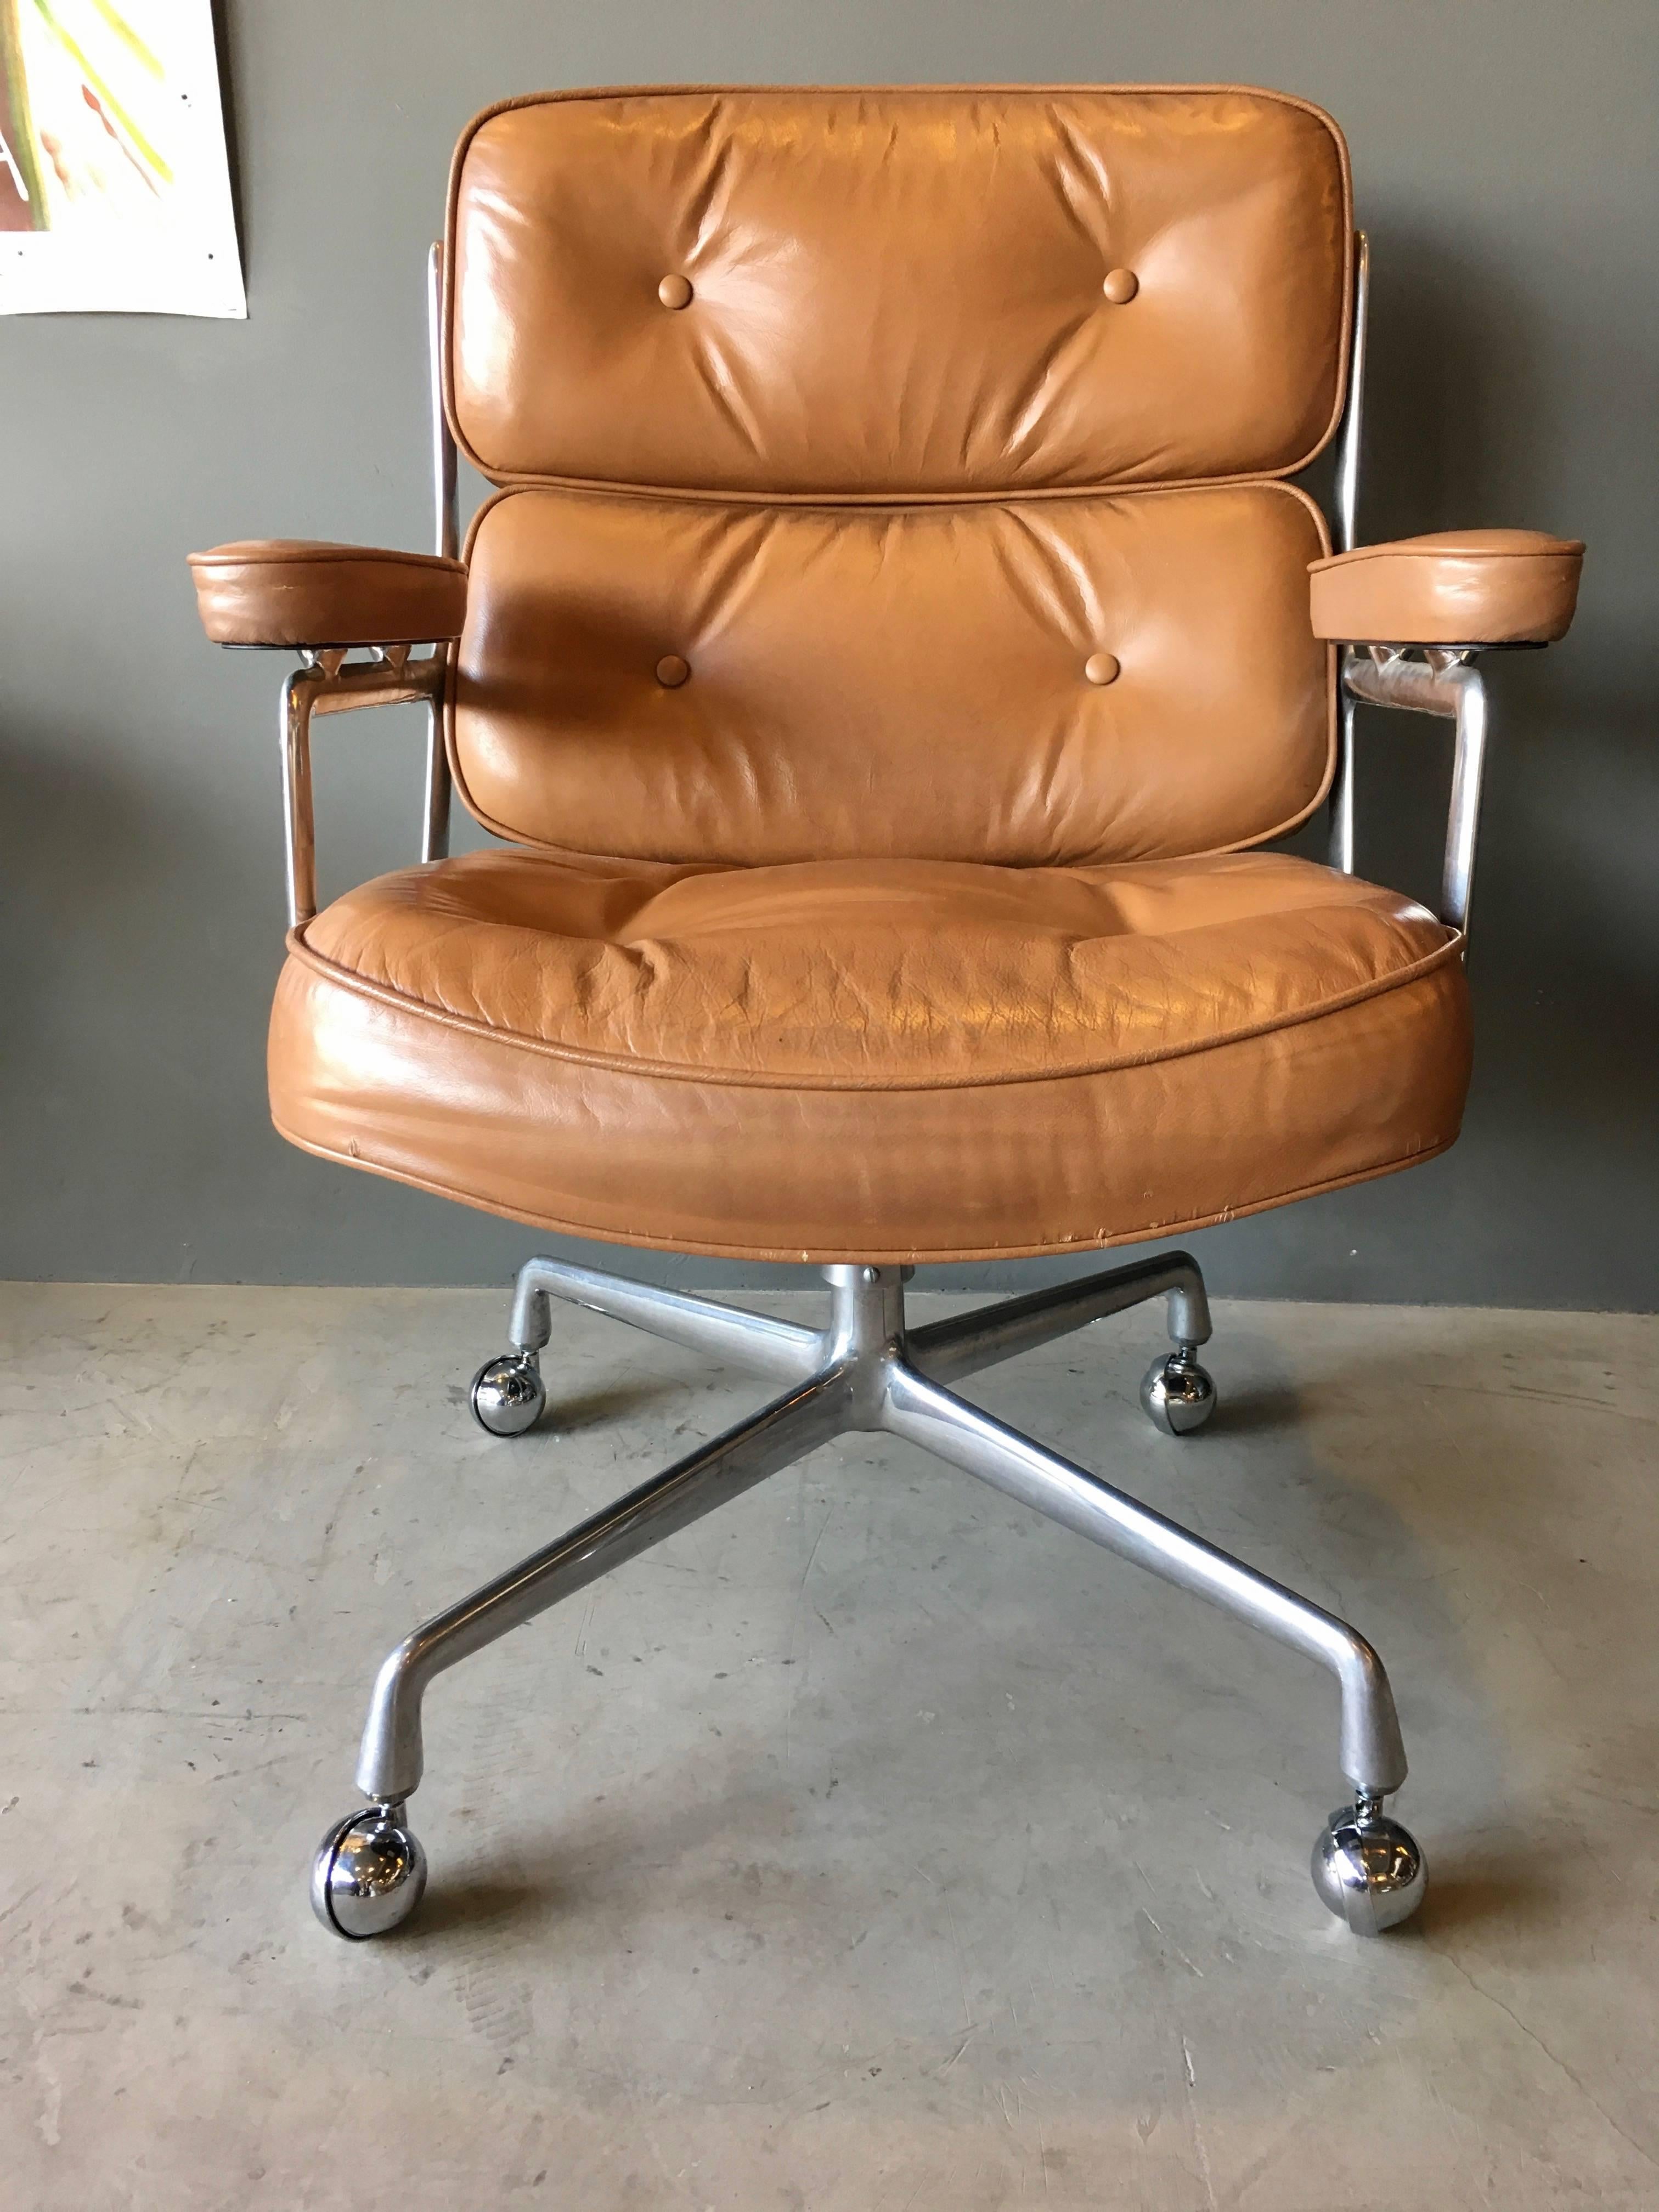 Great vintage leather office chair from the Time Life building in New York. Original tan leather very good vintage condition. Gorgeous age to leather. Chair swivels, reclines and is height adjustable. New casters. Original aluminium frame also in